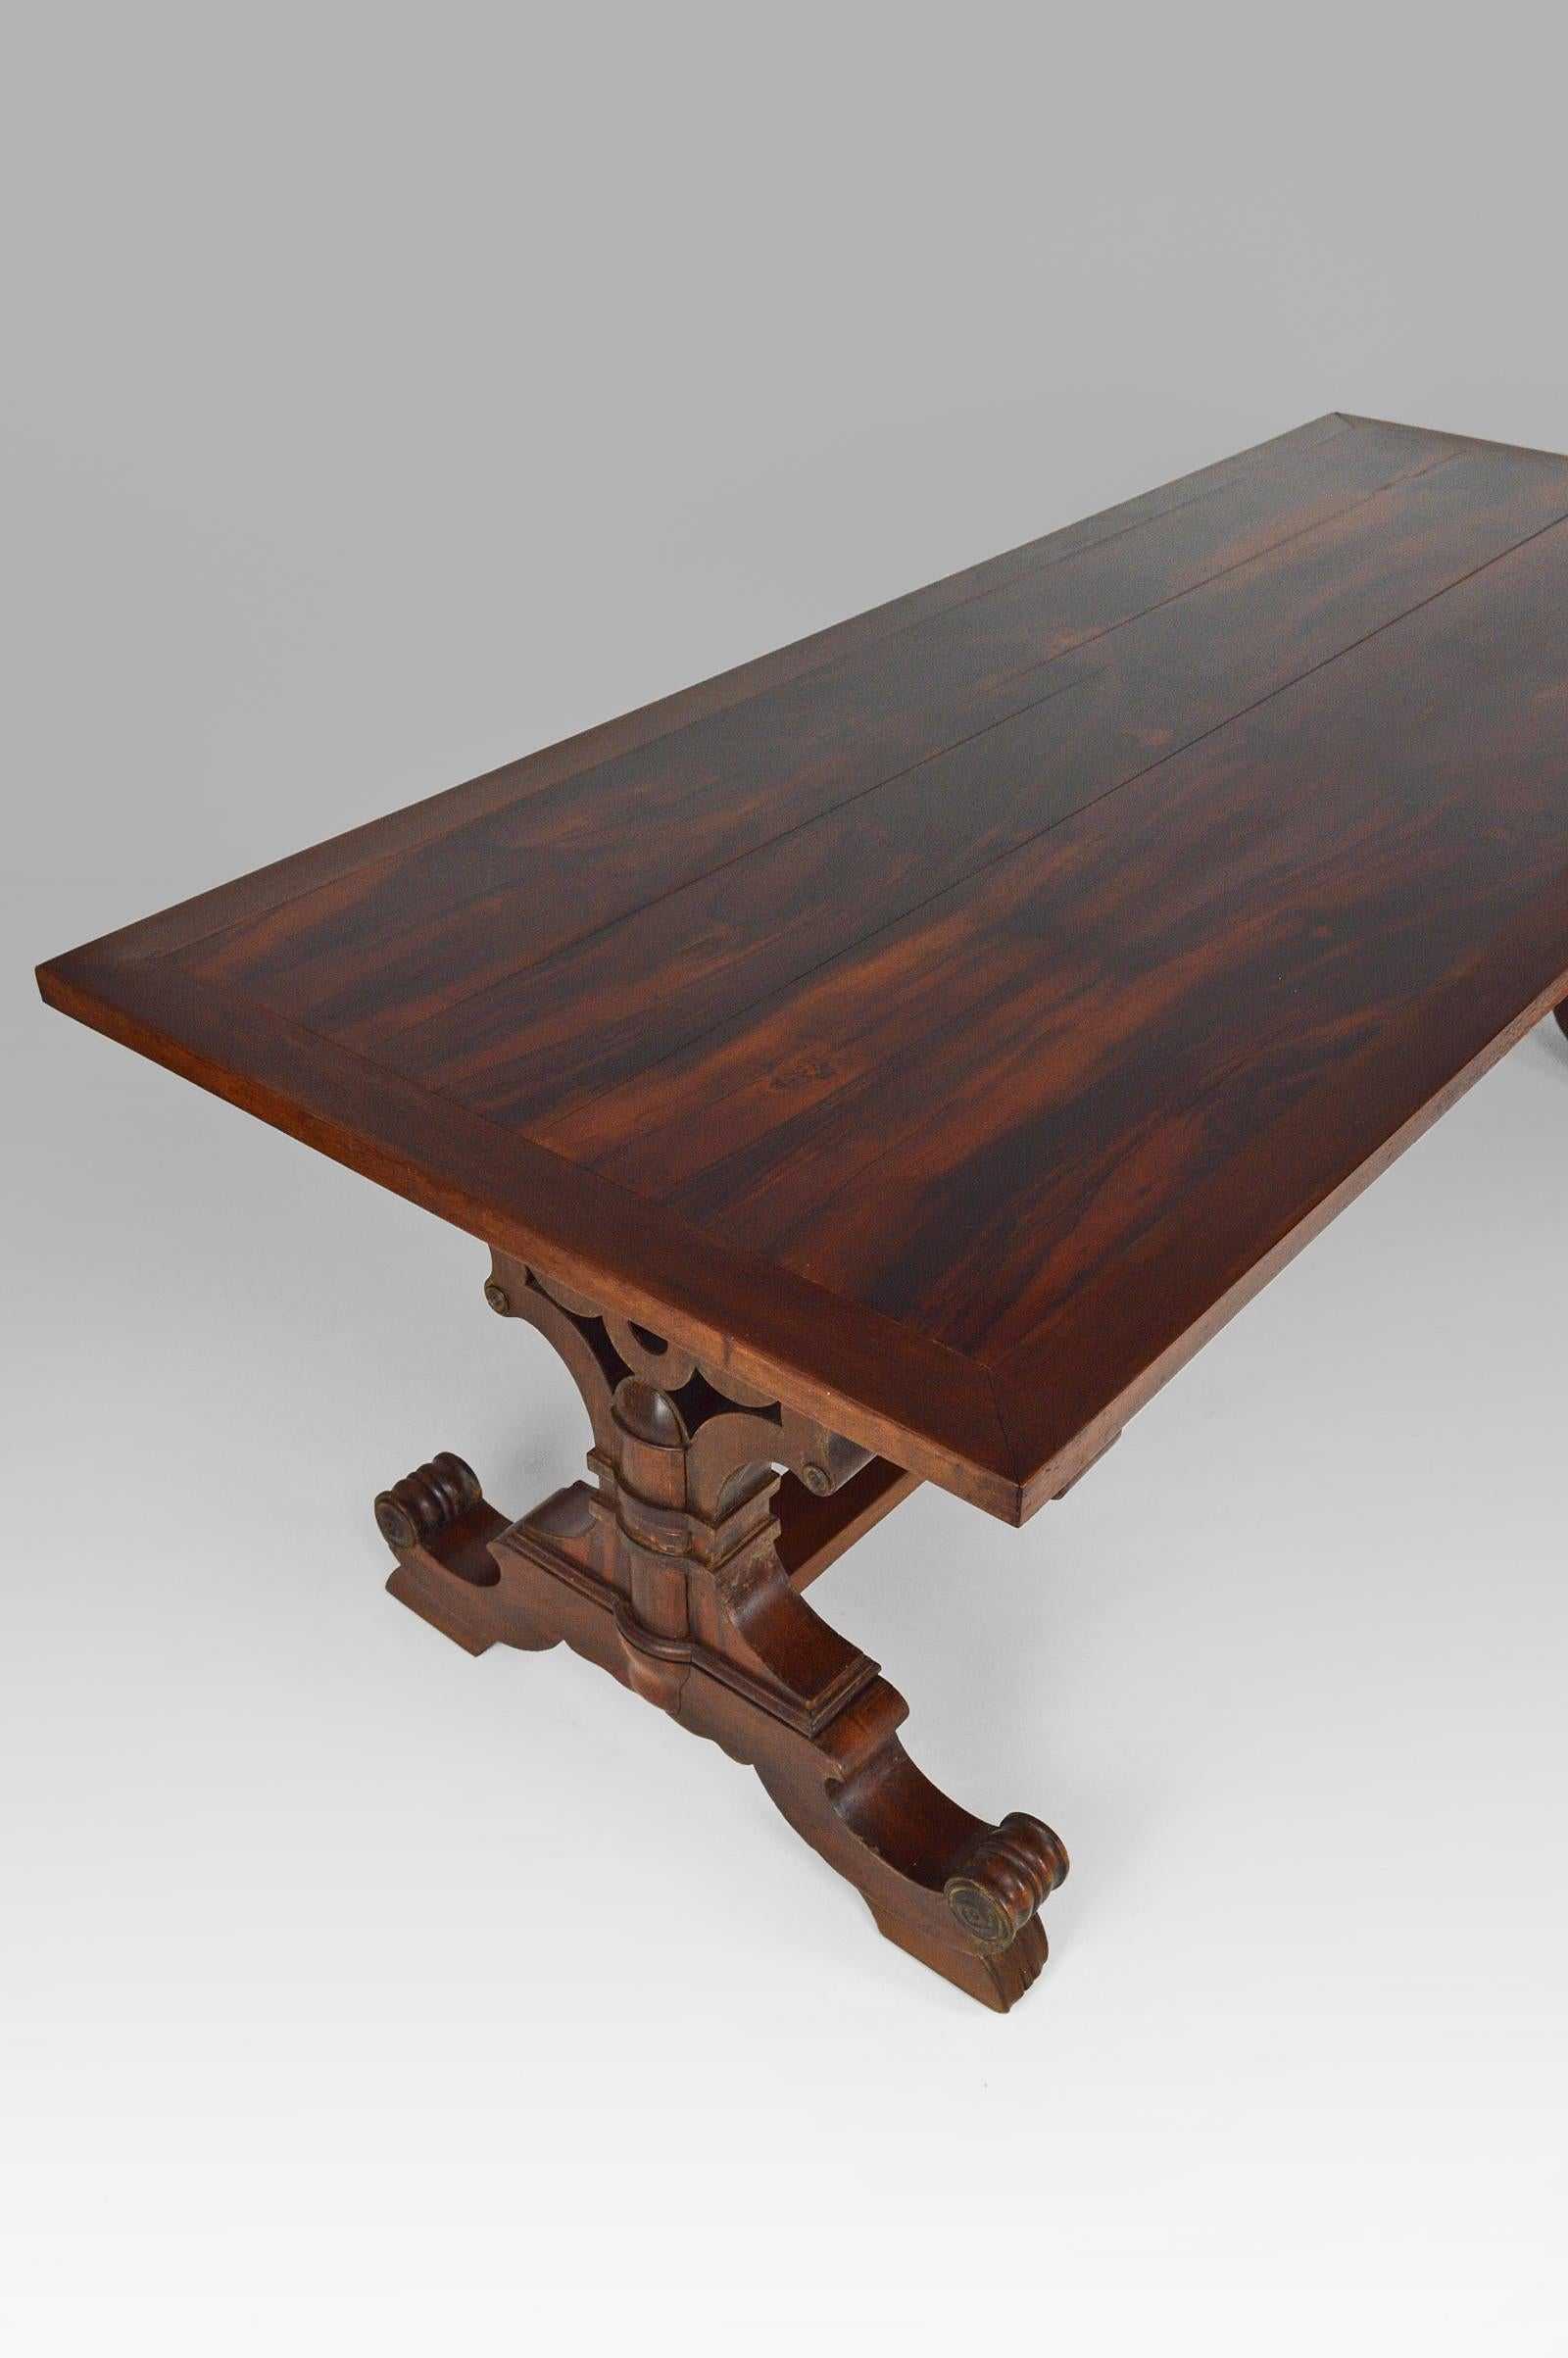 Mid-19th Century Gothic Revival Dining Table in Mahogany, Victorian Era, circa 1840 For Sale